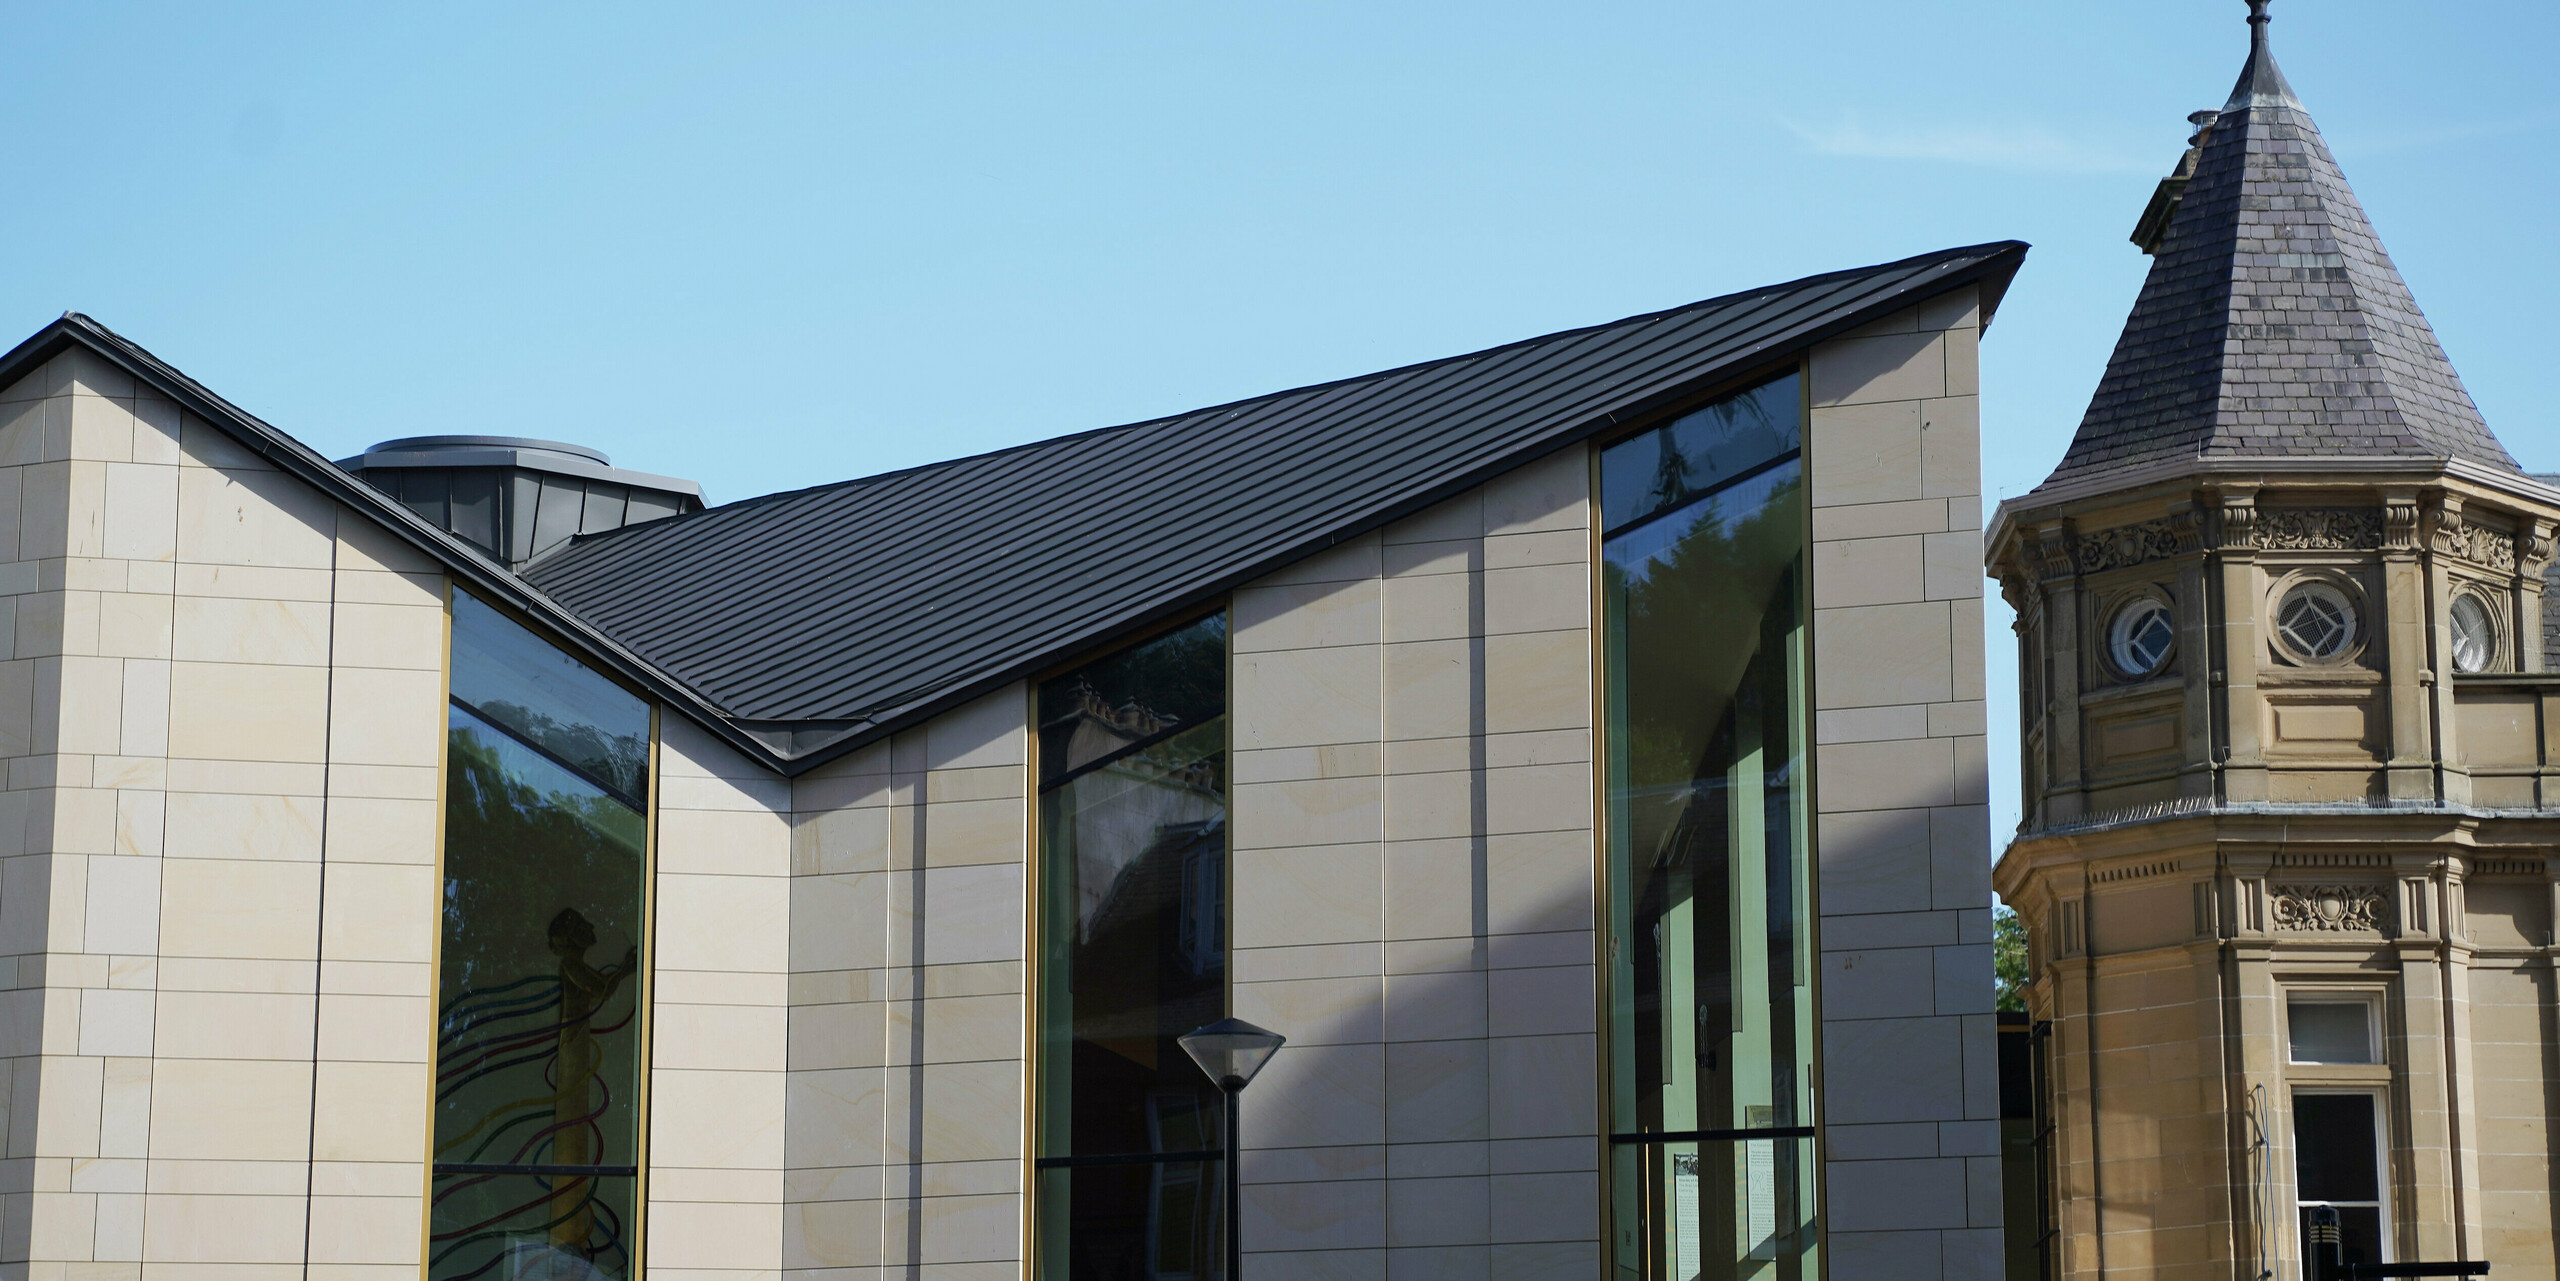 Side view of 'The Great Tapestry of Scotland' museum in Galashiels, which is characterised by a modern PREFALZ roof in P.10 zinc grey. The roof with its clear, geometric lines forms an attractive contrast to the traditional sandstone façades of the neighbouring buildings. The unique roof construction with its striking edges gives the building a contemporary flair and emphasises the combination of historical architecture and modern design.